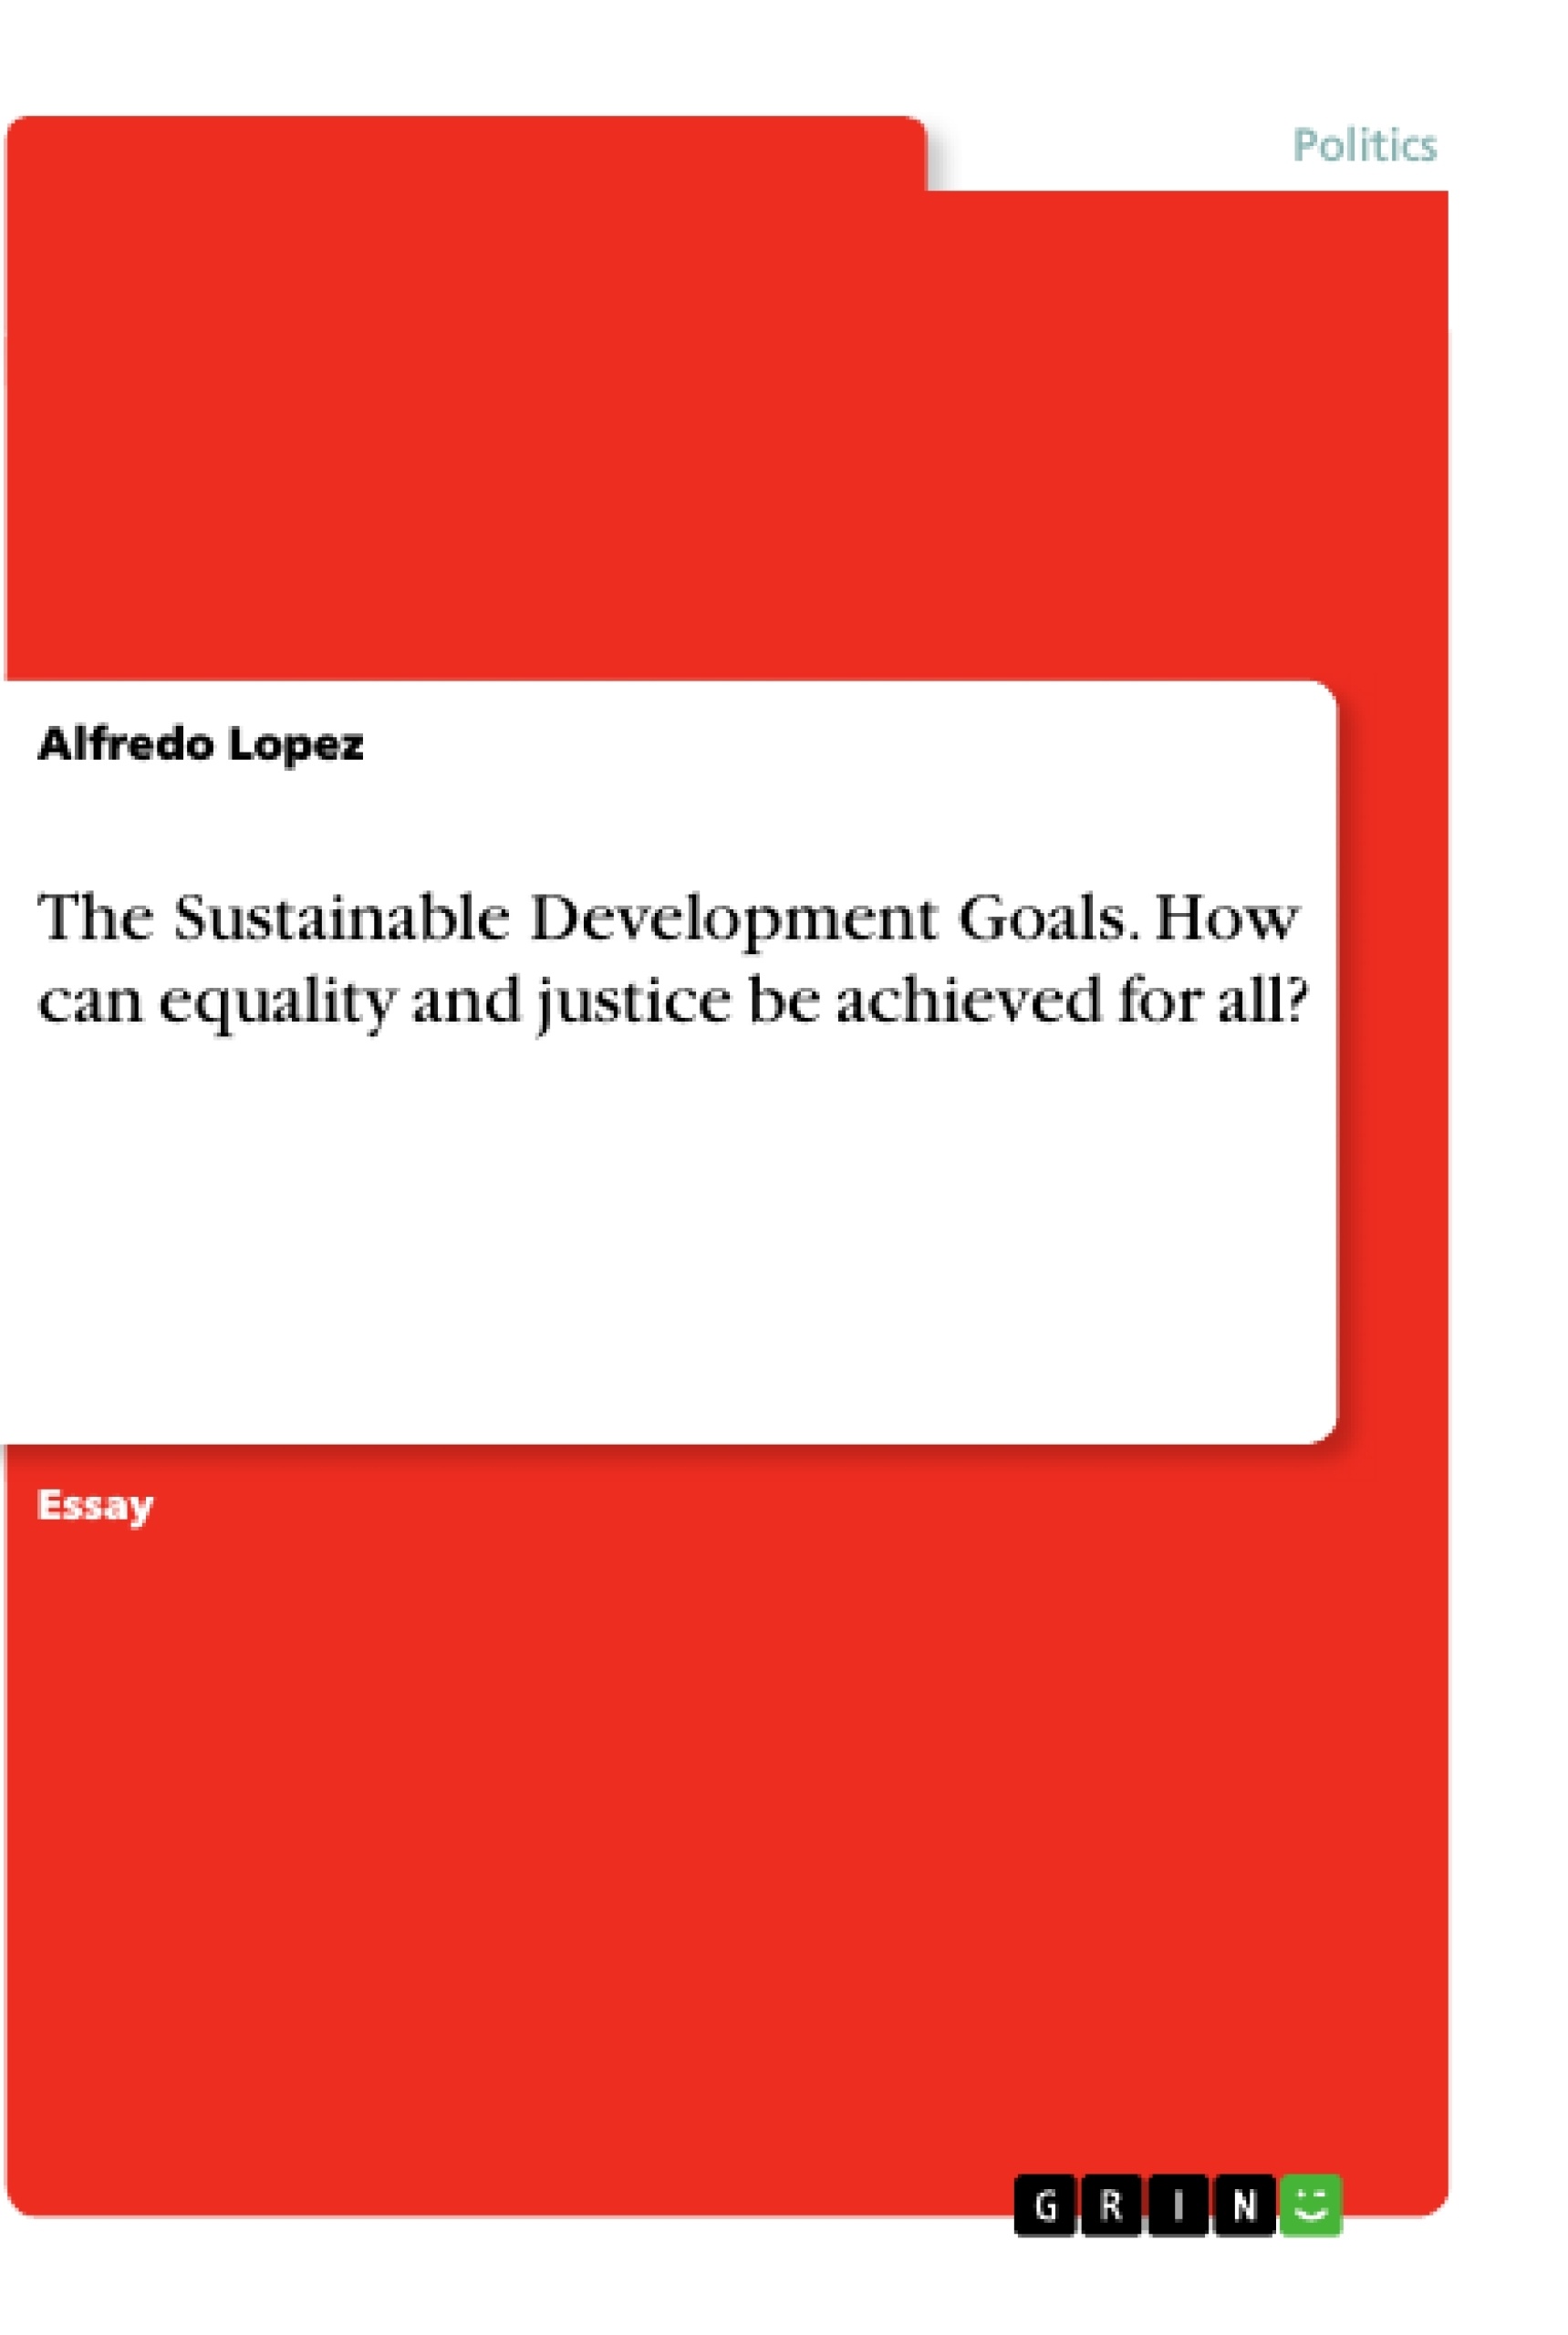 Titel: The Sustainable Development Goals. How can equality and justice be achieved for all?